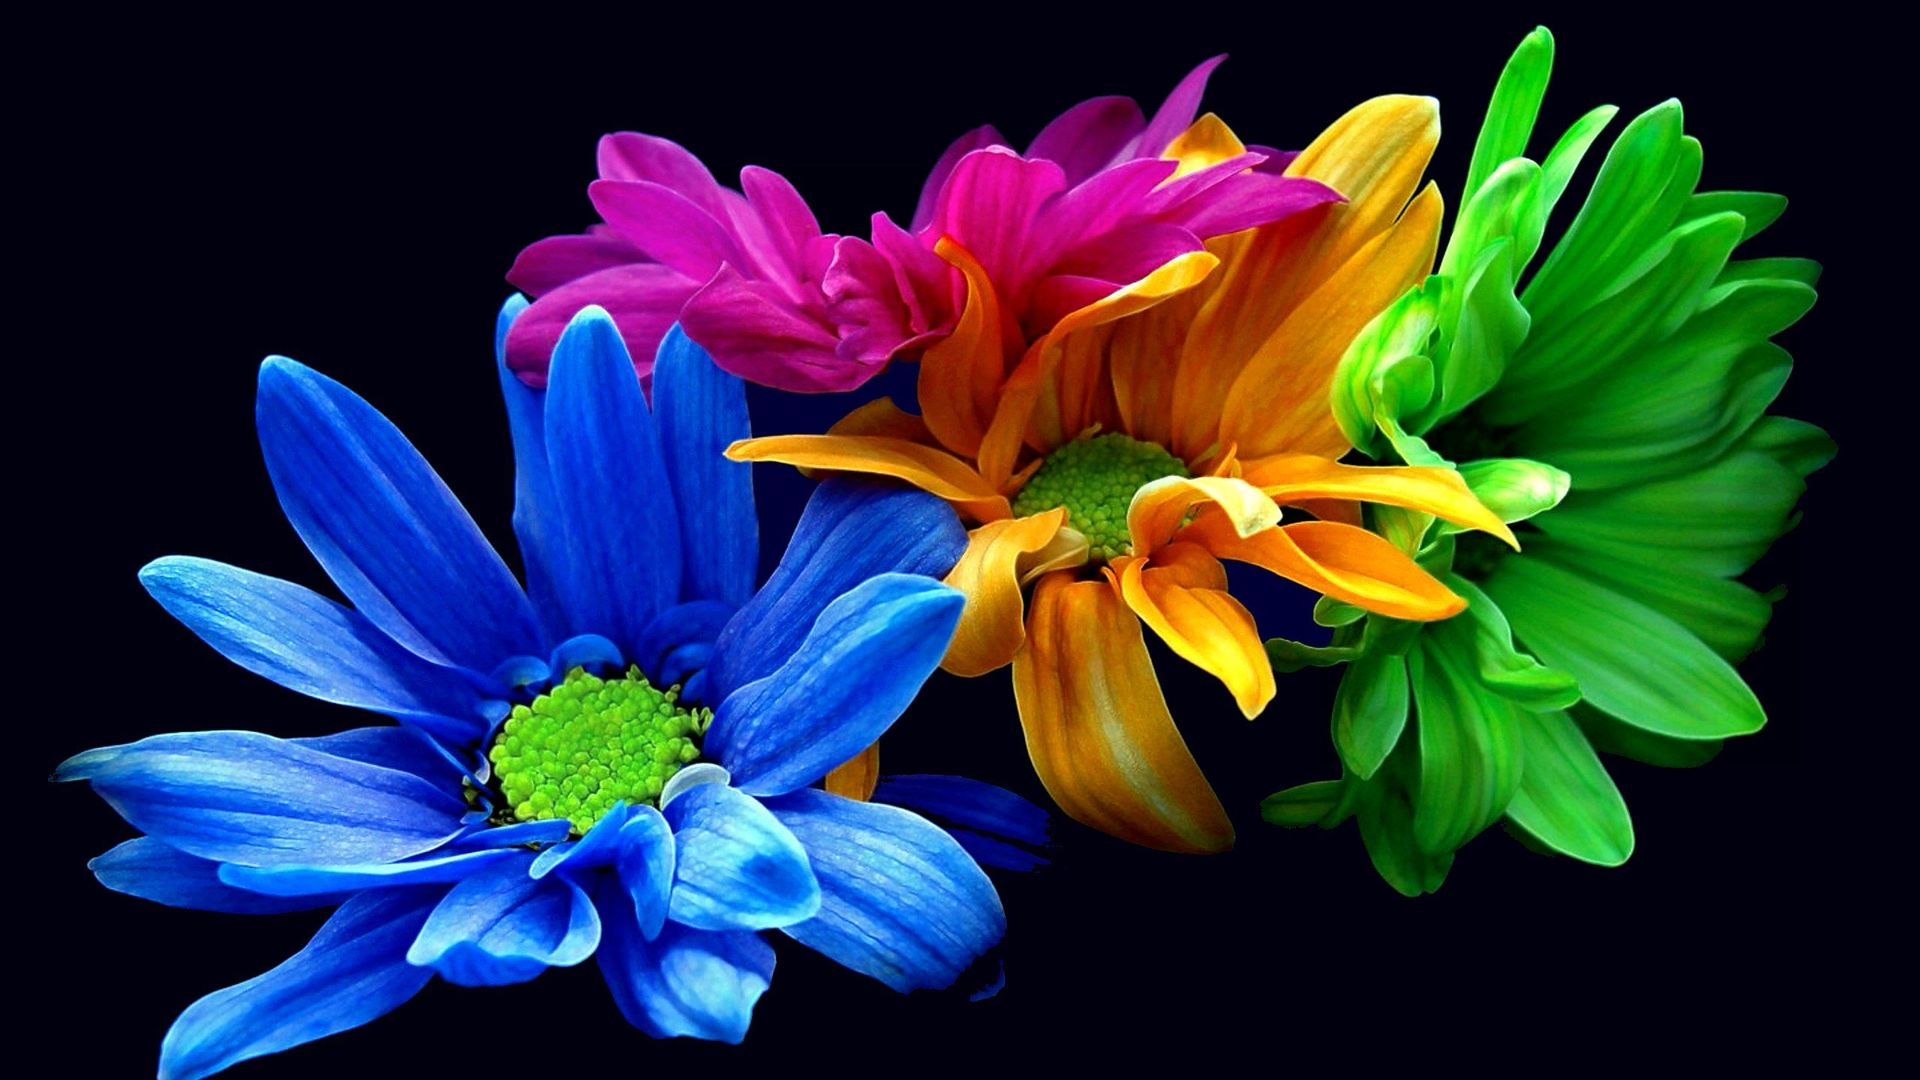 Colorful Flowers Black Background - HD Wallpaper 